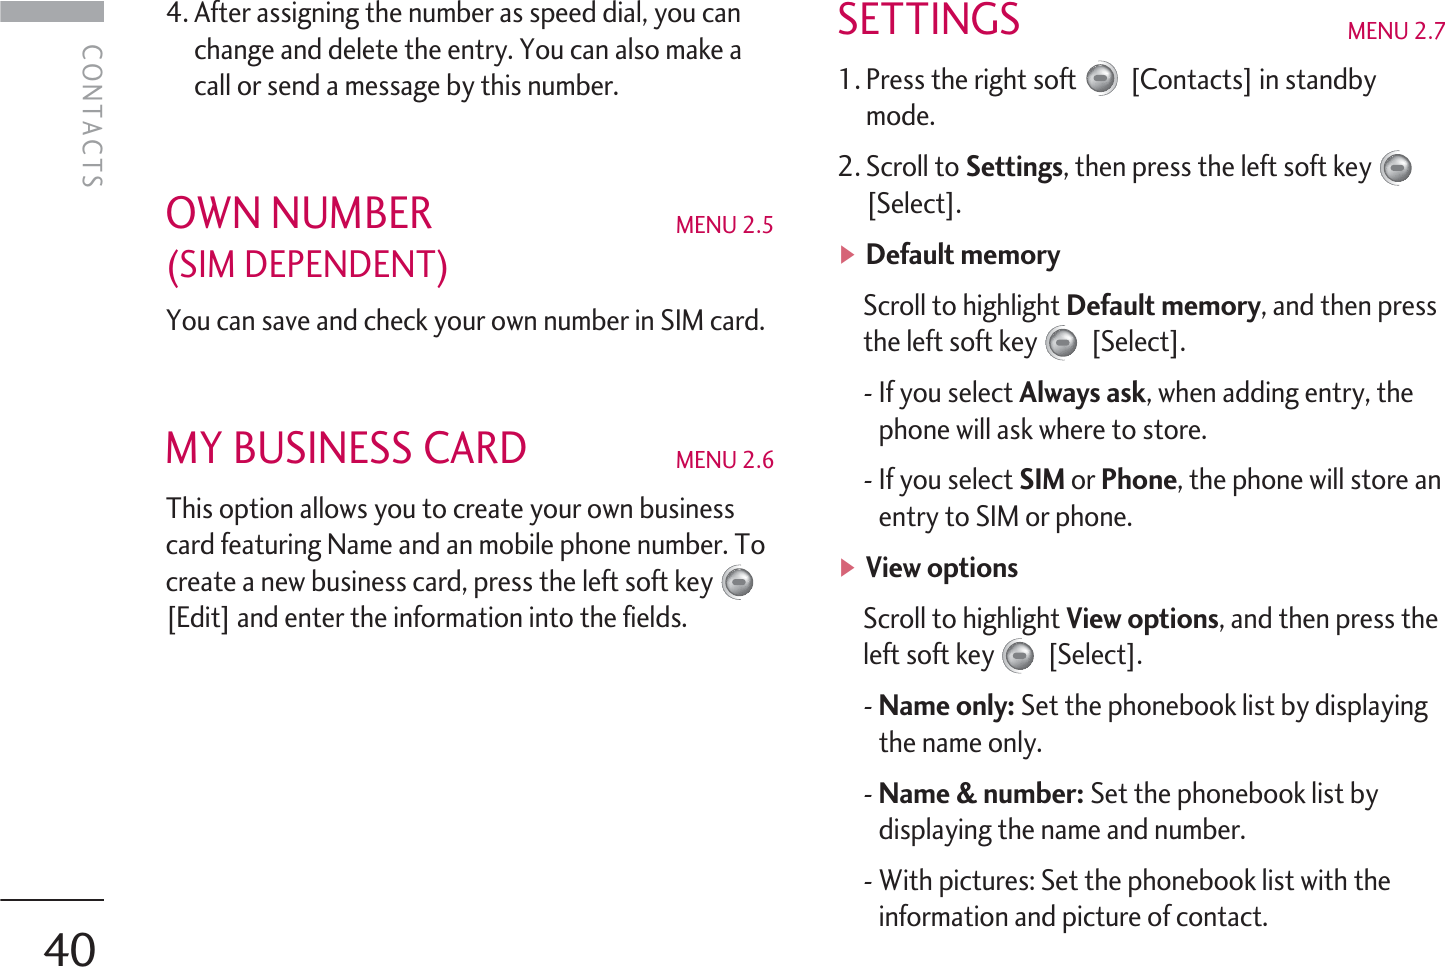 4. After assigning the number as speed dial, you canchange and delete the entry. You can also make acall or send a message by this number.OWN NUMBER MENU 2.5(SIM DEPENDENT)You can save and check your own number in SIM card.MY BUSINESS CARD MENU 2.6 This option allows you to create your own businesscard featuring Name and an mobile phone number. Tocreate a new business card, press the left soft key[Edit] and enter the information into the fields.SETTINGS MENU 2.71. Press the right soft [Contacts] in standbymode.2. Scroll to Settings, then press the left soft key[Select].]Default memory Scroll to highlight Default memory, and then pressthe left soft key [Select].- If you select Always ask, when adding entry, thephone will ask where to store.- If you select SIM or Phone, the phone will store anentry to SIM or phone.]View options Scroll to highlight View options, and then press theleft soft key [Select].- Name only: Set the phonebook list by displayingthe name only.- Name &amp; number: Set the phonebook list bydisplaying the name and number.- With pictures: Set the phonebook list with theinformation and picture of contact.CONTACTSCONTACTS40